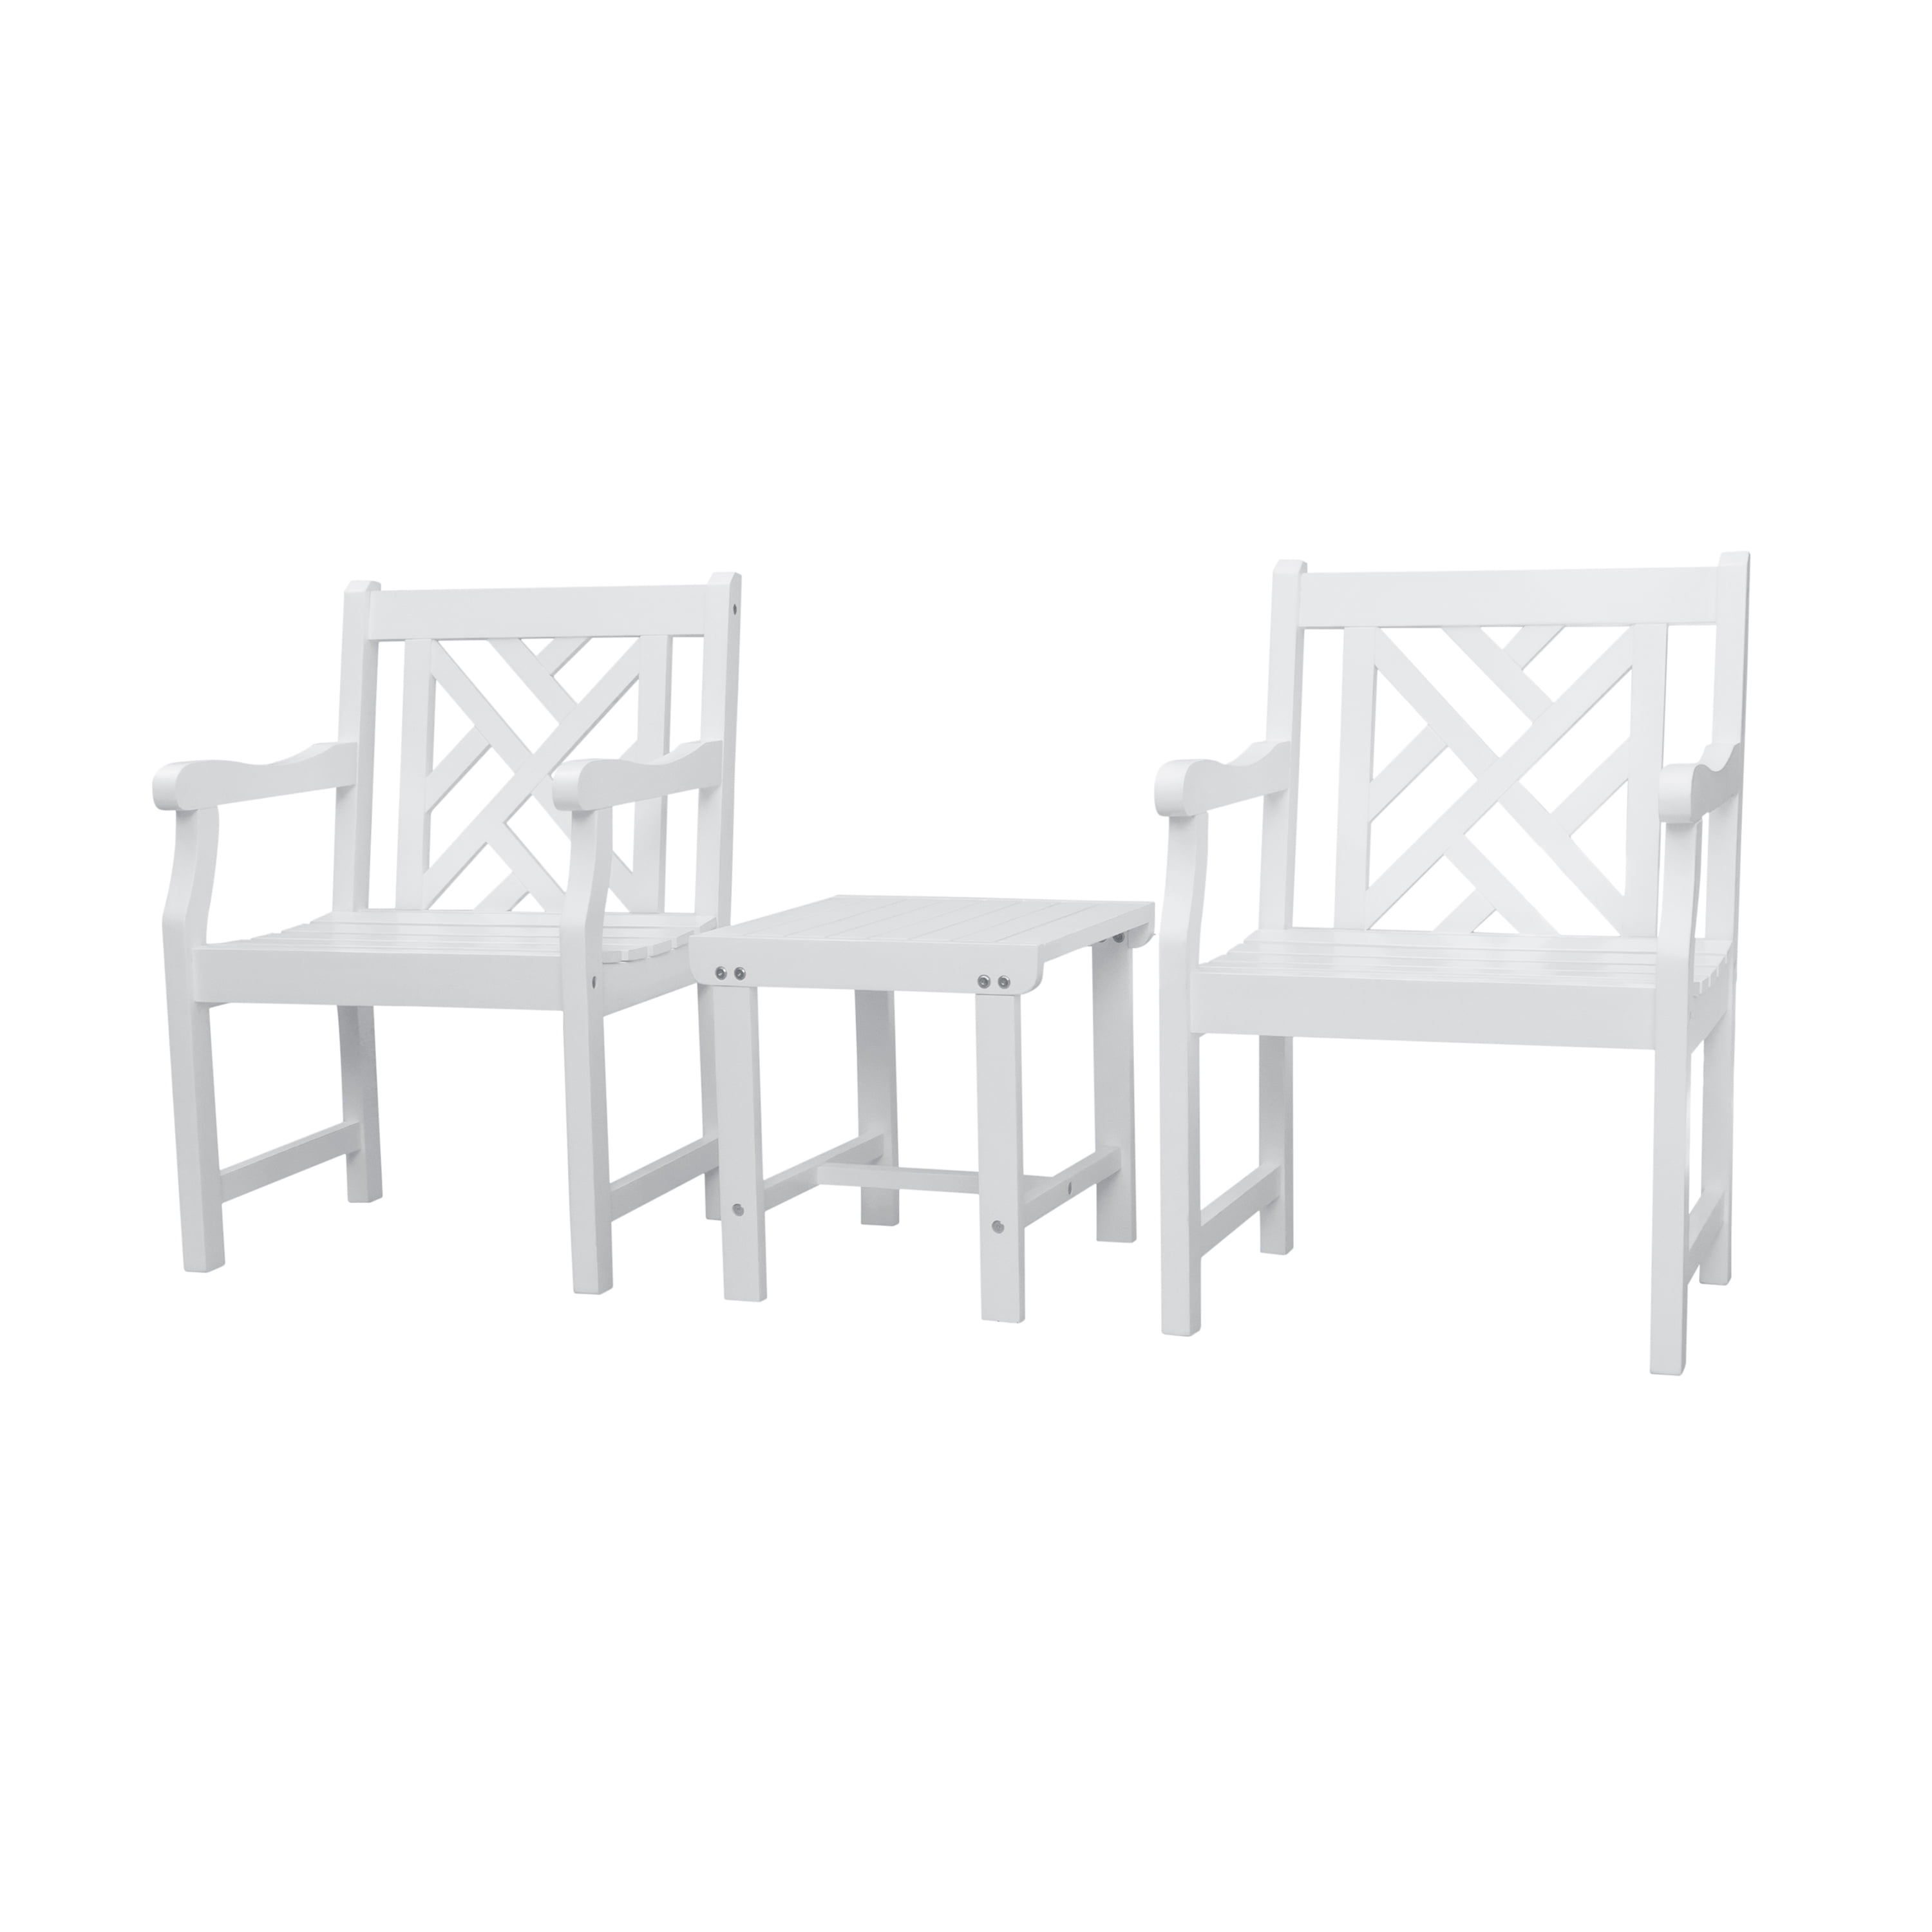 V1844set3 Bradley Outdoor Patio Wood Conversation Set, White Painted - 36 X 23 X 22 In. - 3 Piece